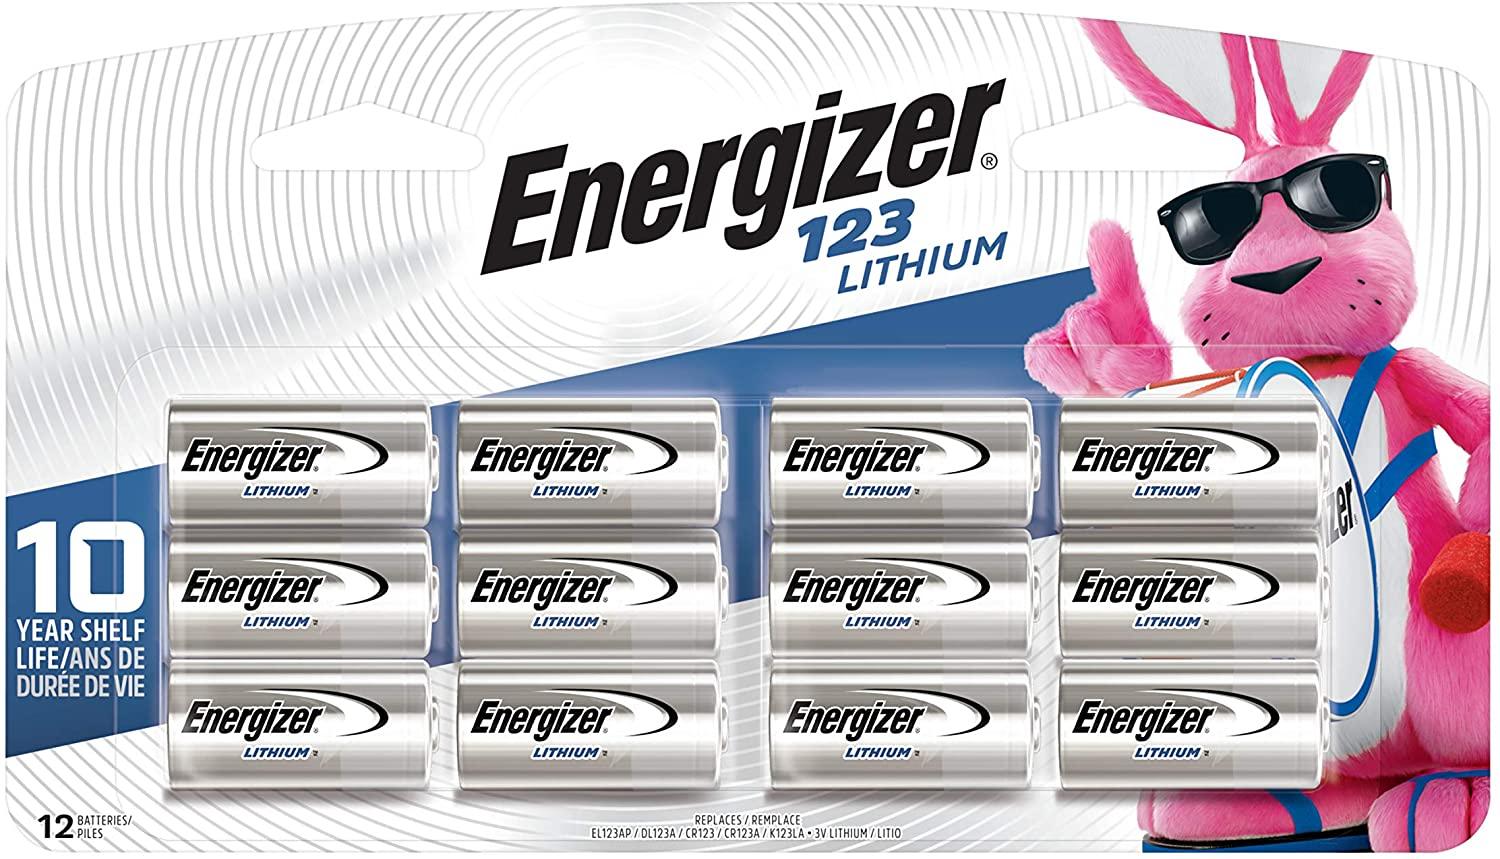 12 Energizer Lithium 123 Batteries for $13.18 Shipped